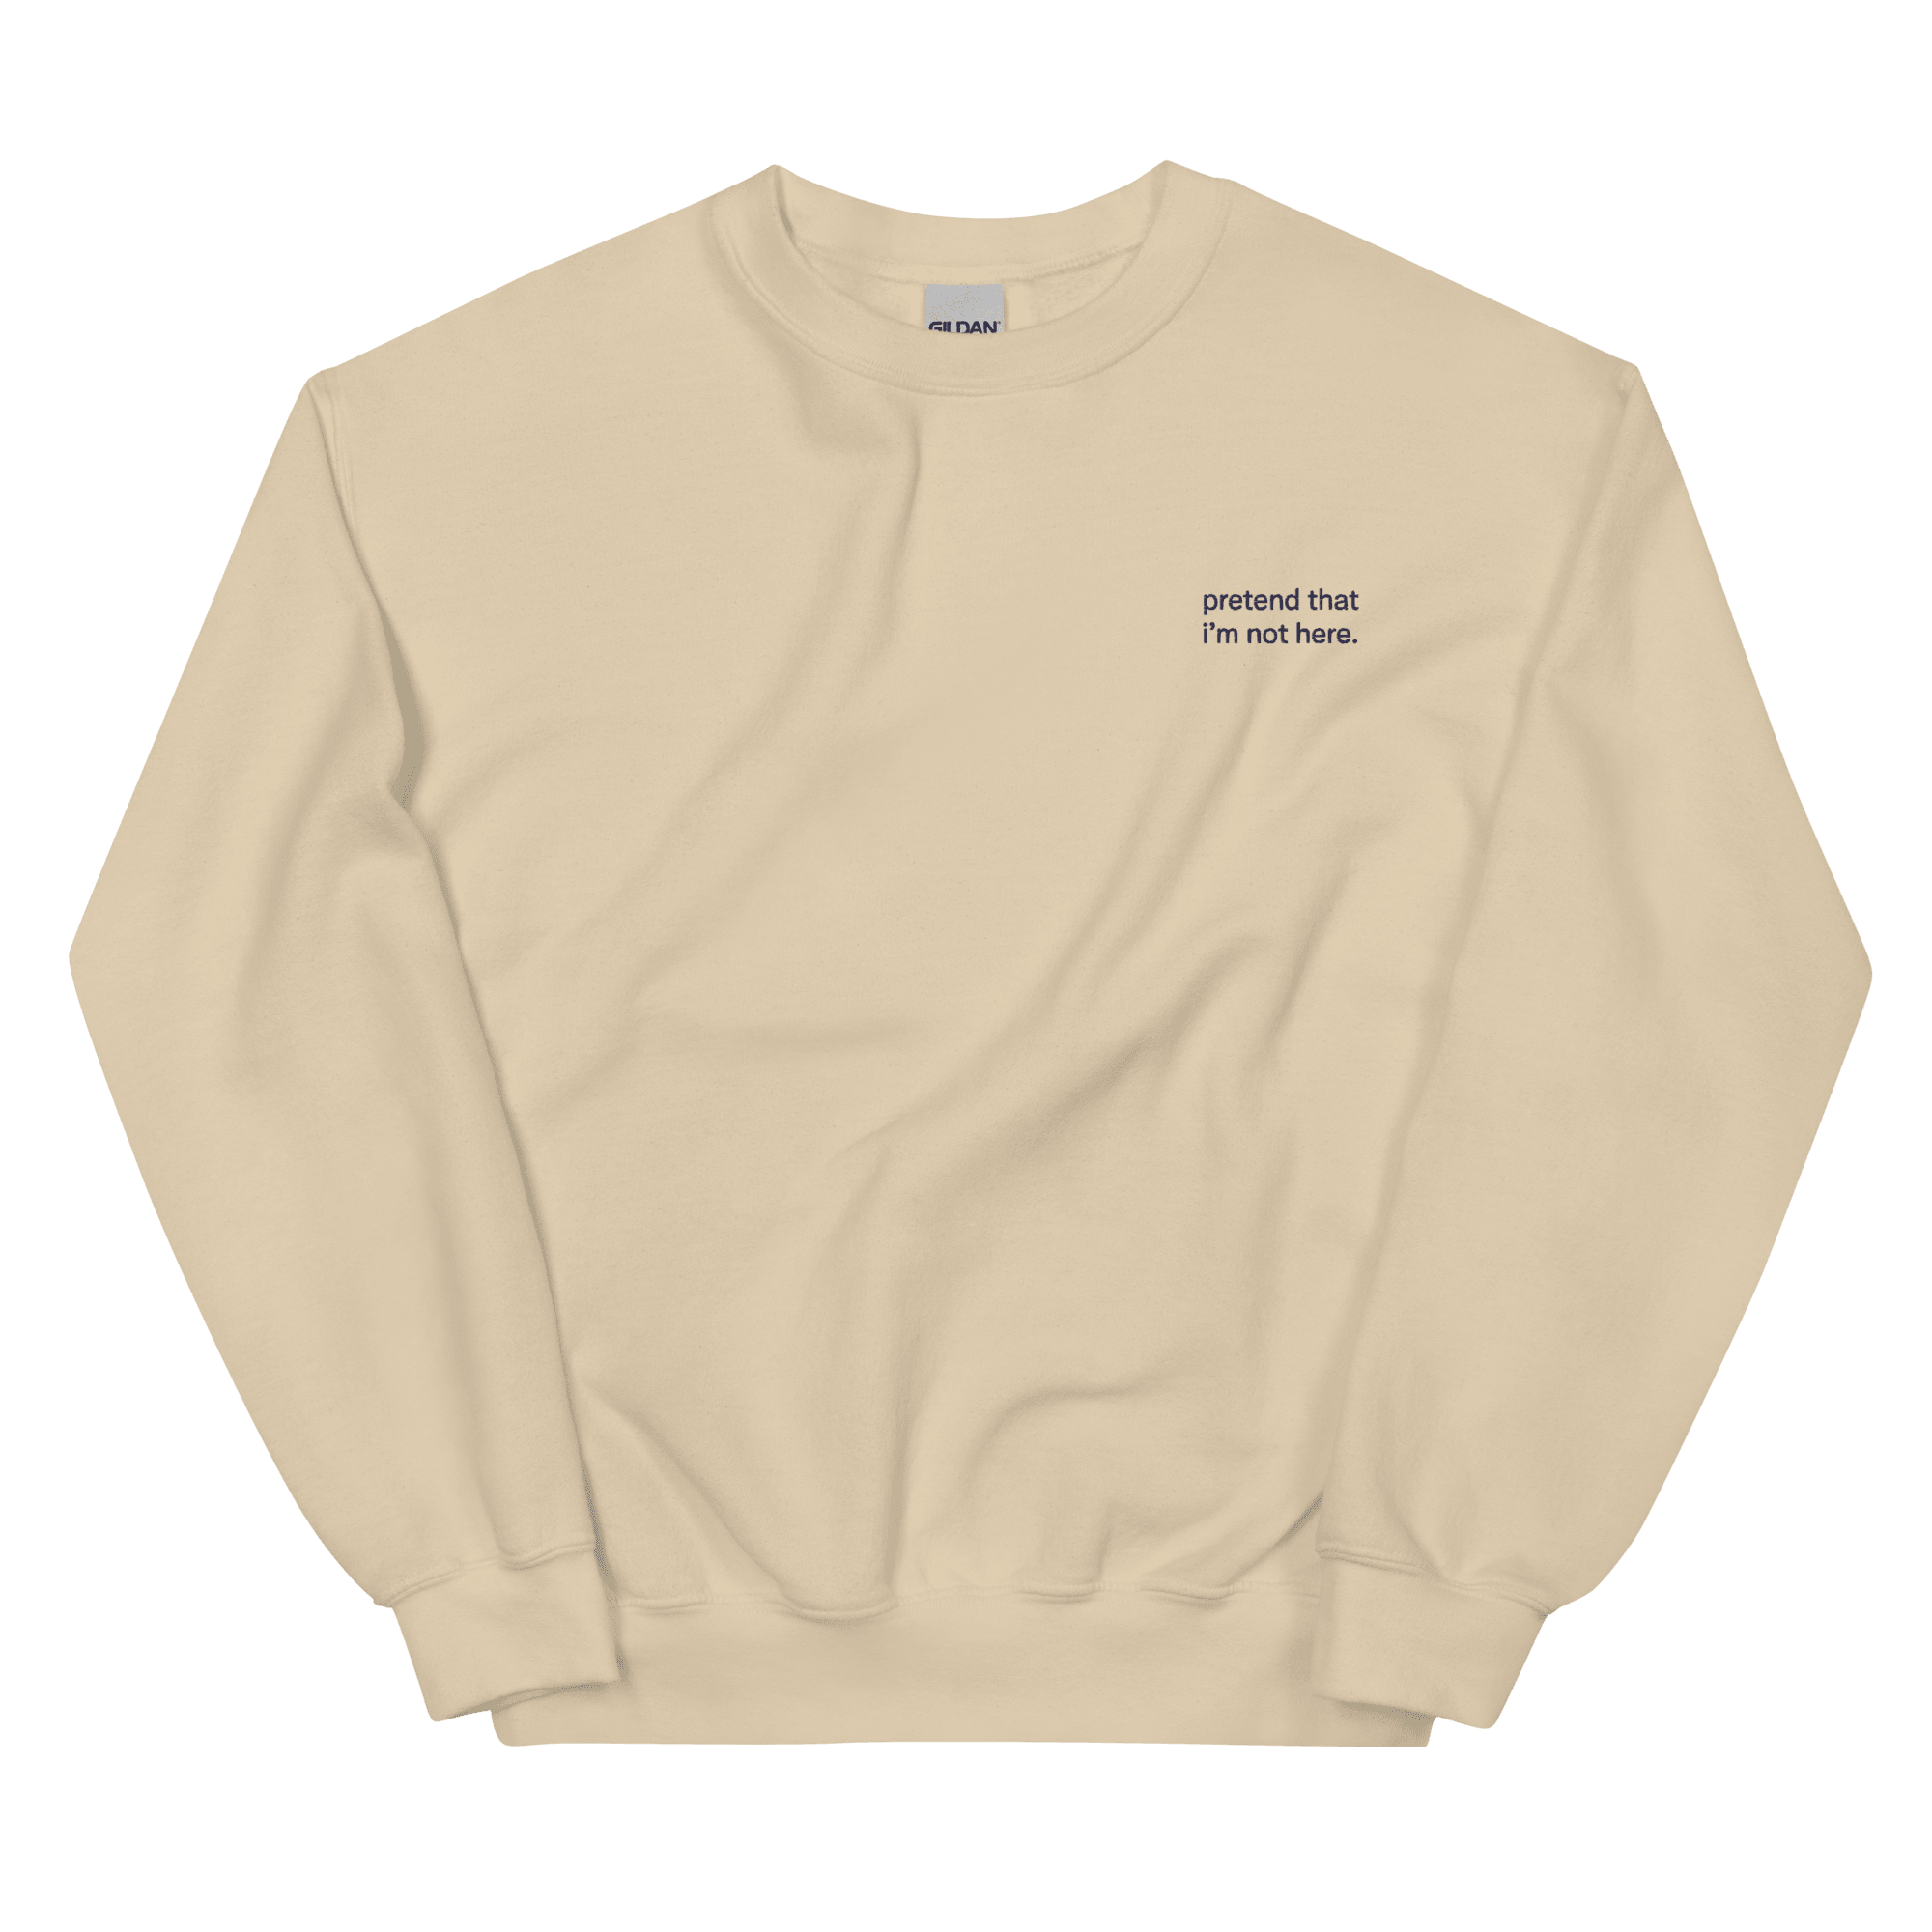 Pretend that I'm not here. Embroidered Sweatshirt - Polychrome Goods 🍊